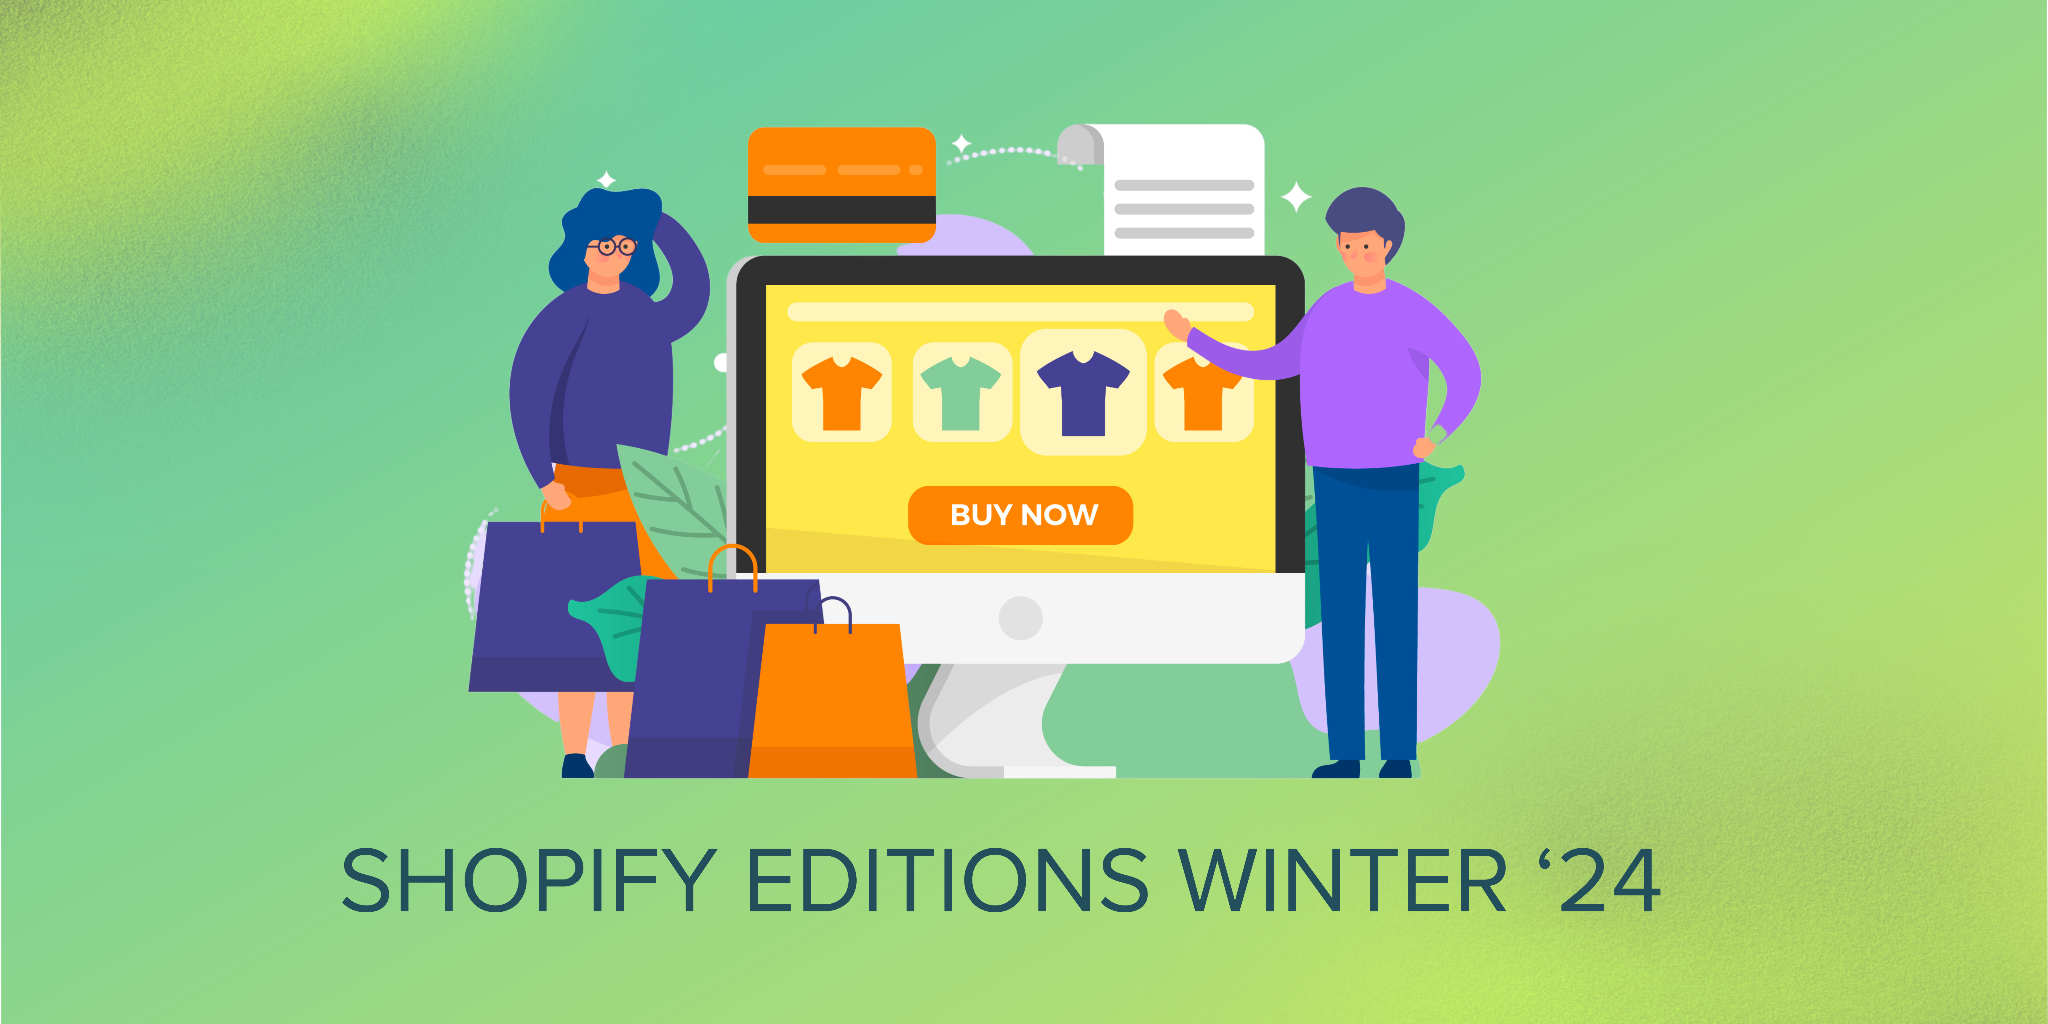 Shopify Winter '24 Edition: A Merchant's Guide to Unlocking Growth